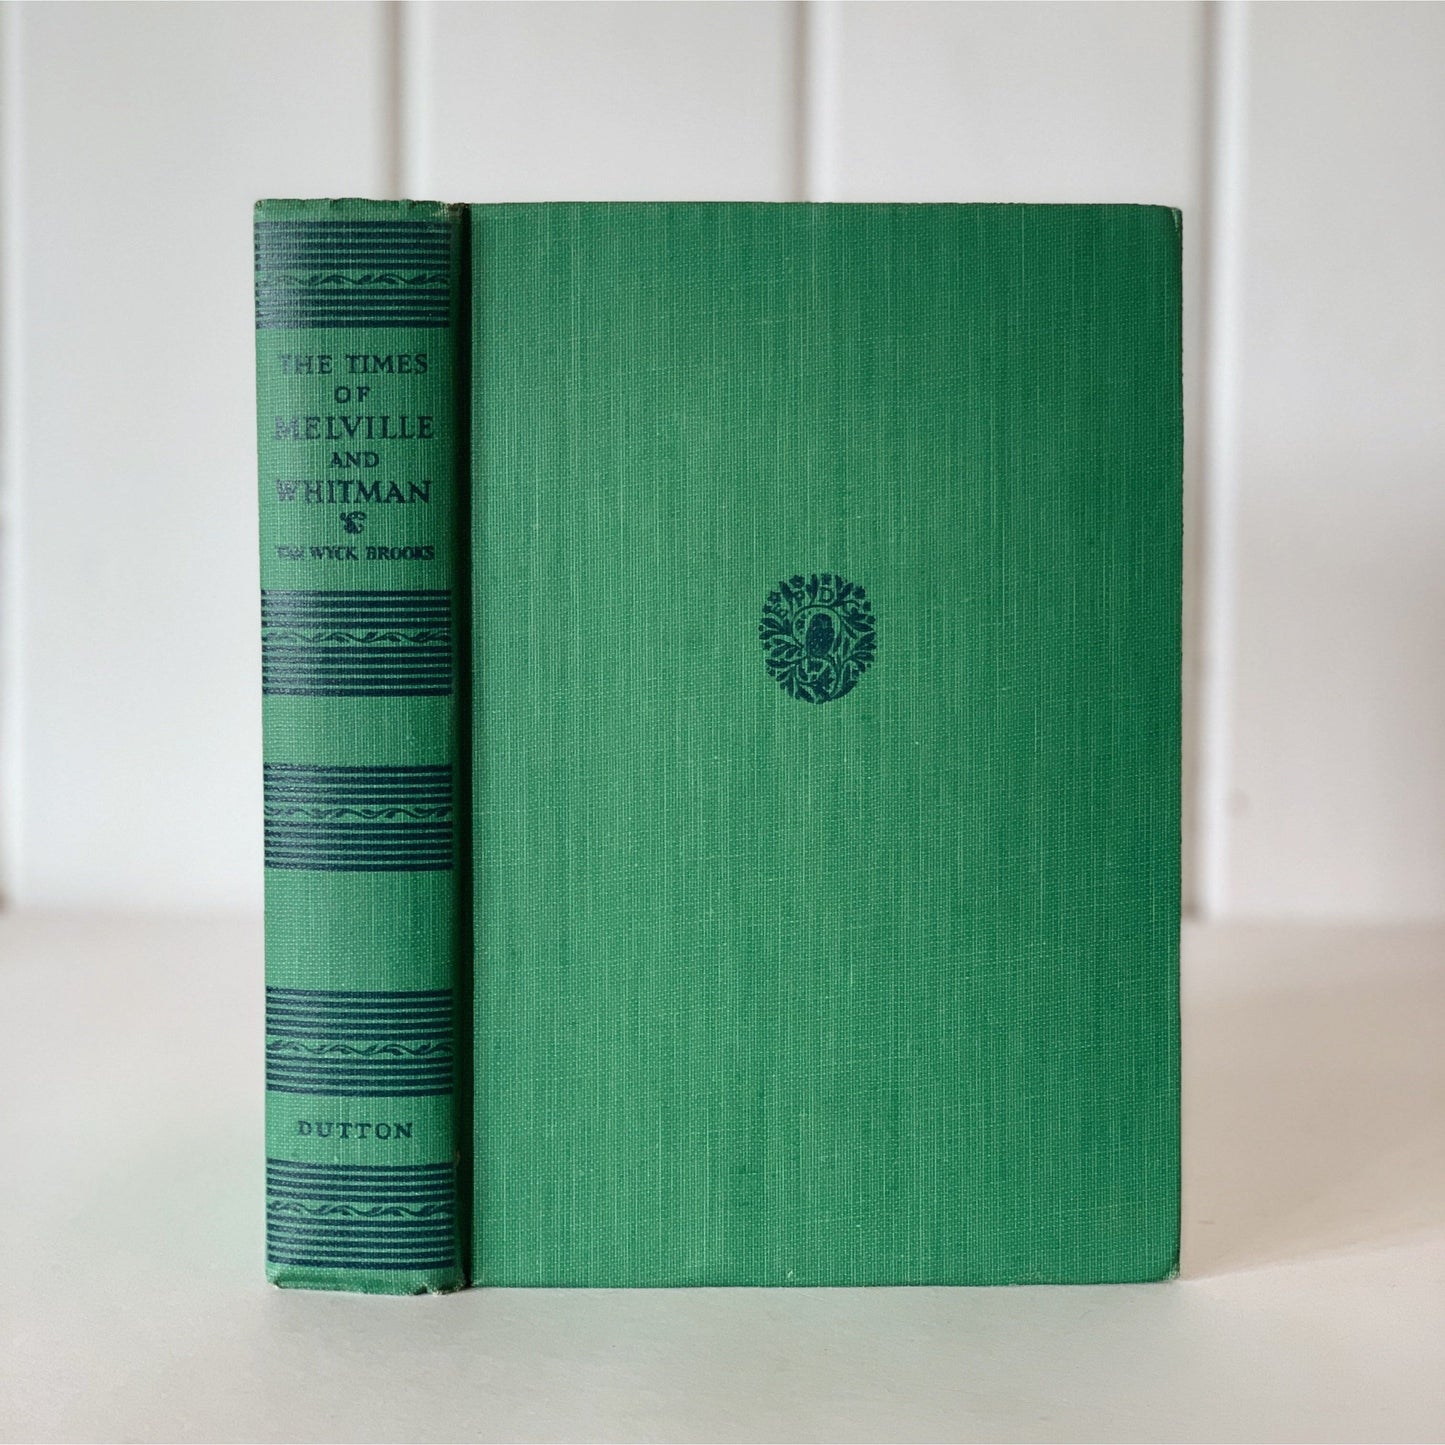 The Times of Melville and Whitman, 1947 First Edition Hardcover